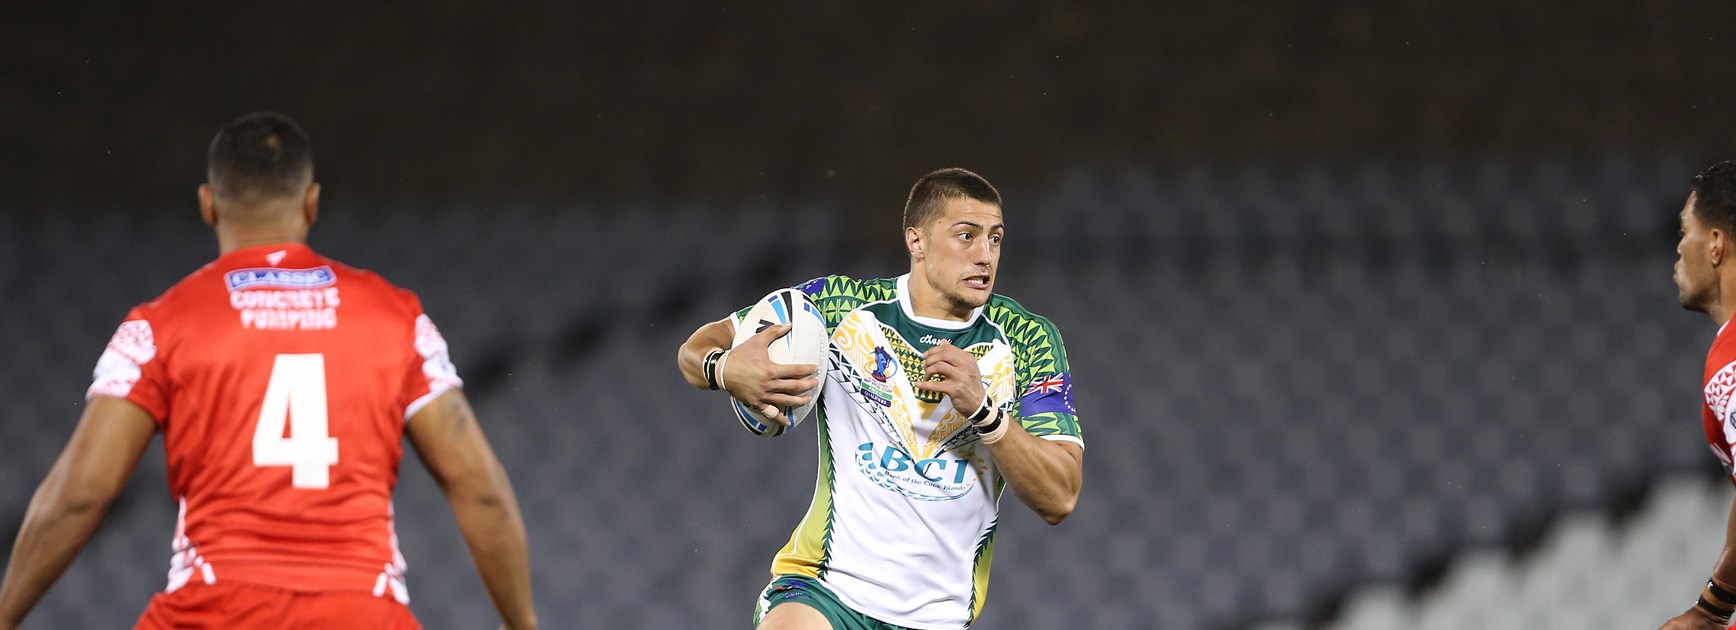 Anthony Gelling in action for the Cook Islands in 2015.